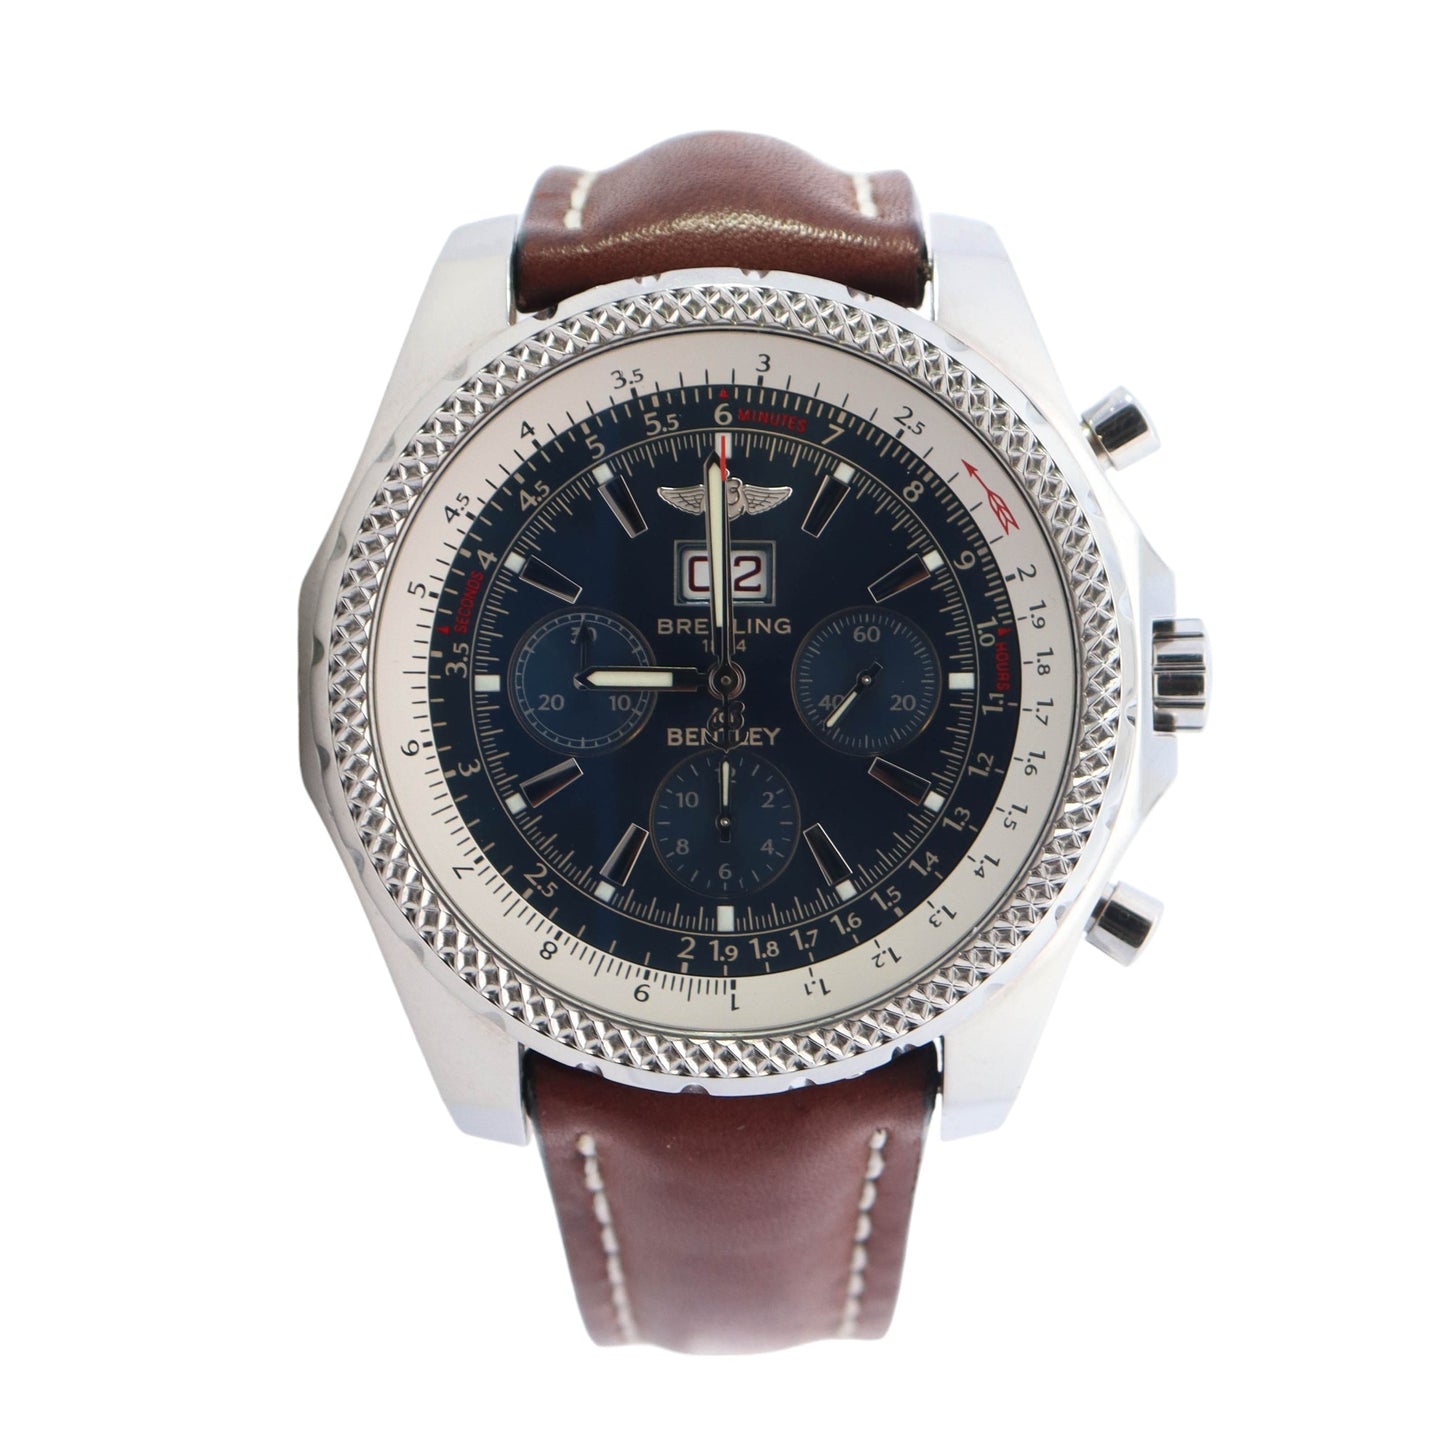 Breitling Bentley Stainless Steel 49mm Blue Chronograph Dial Watch Reference #: A4436212/C652